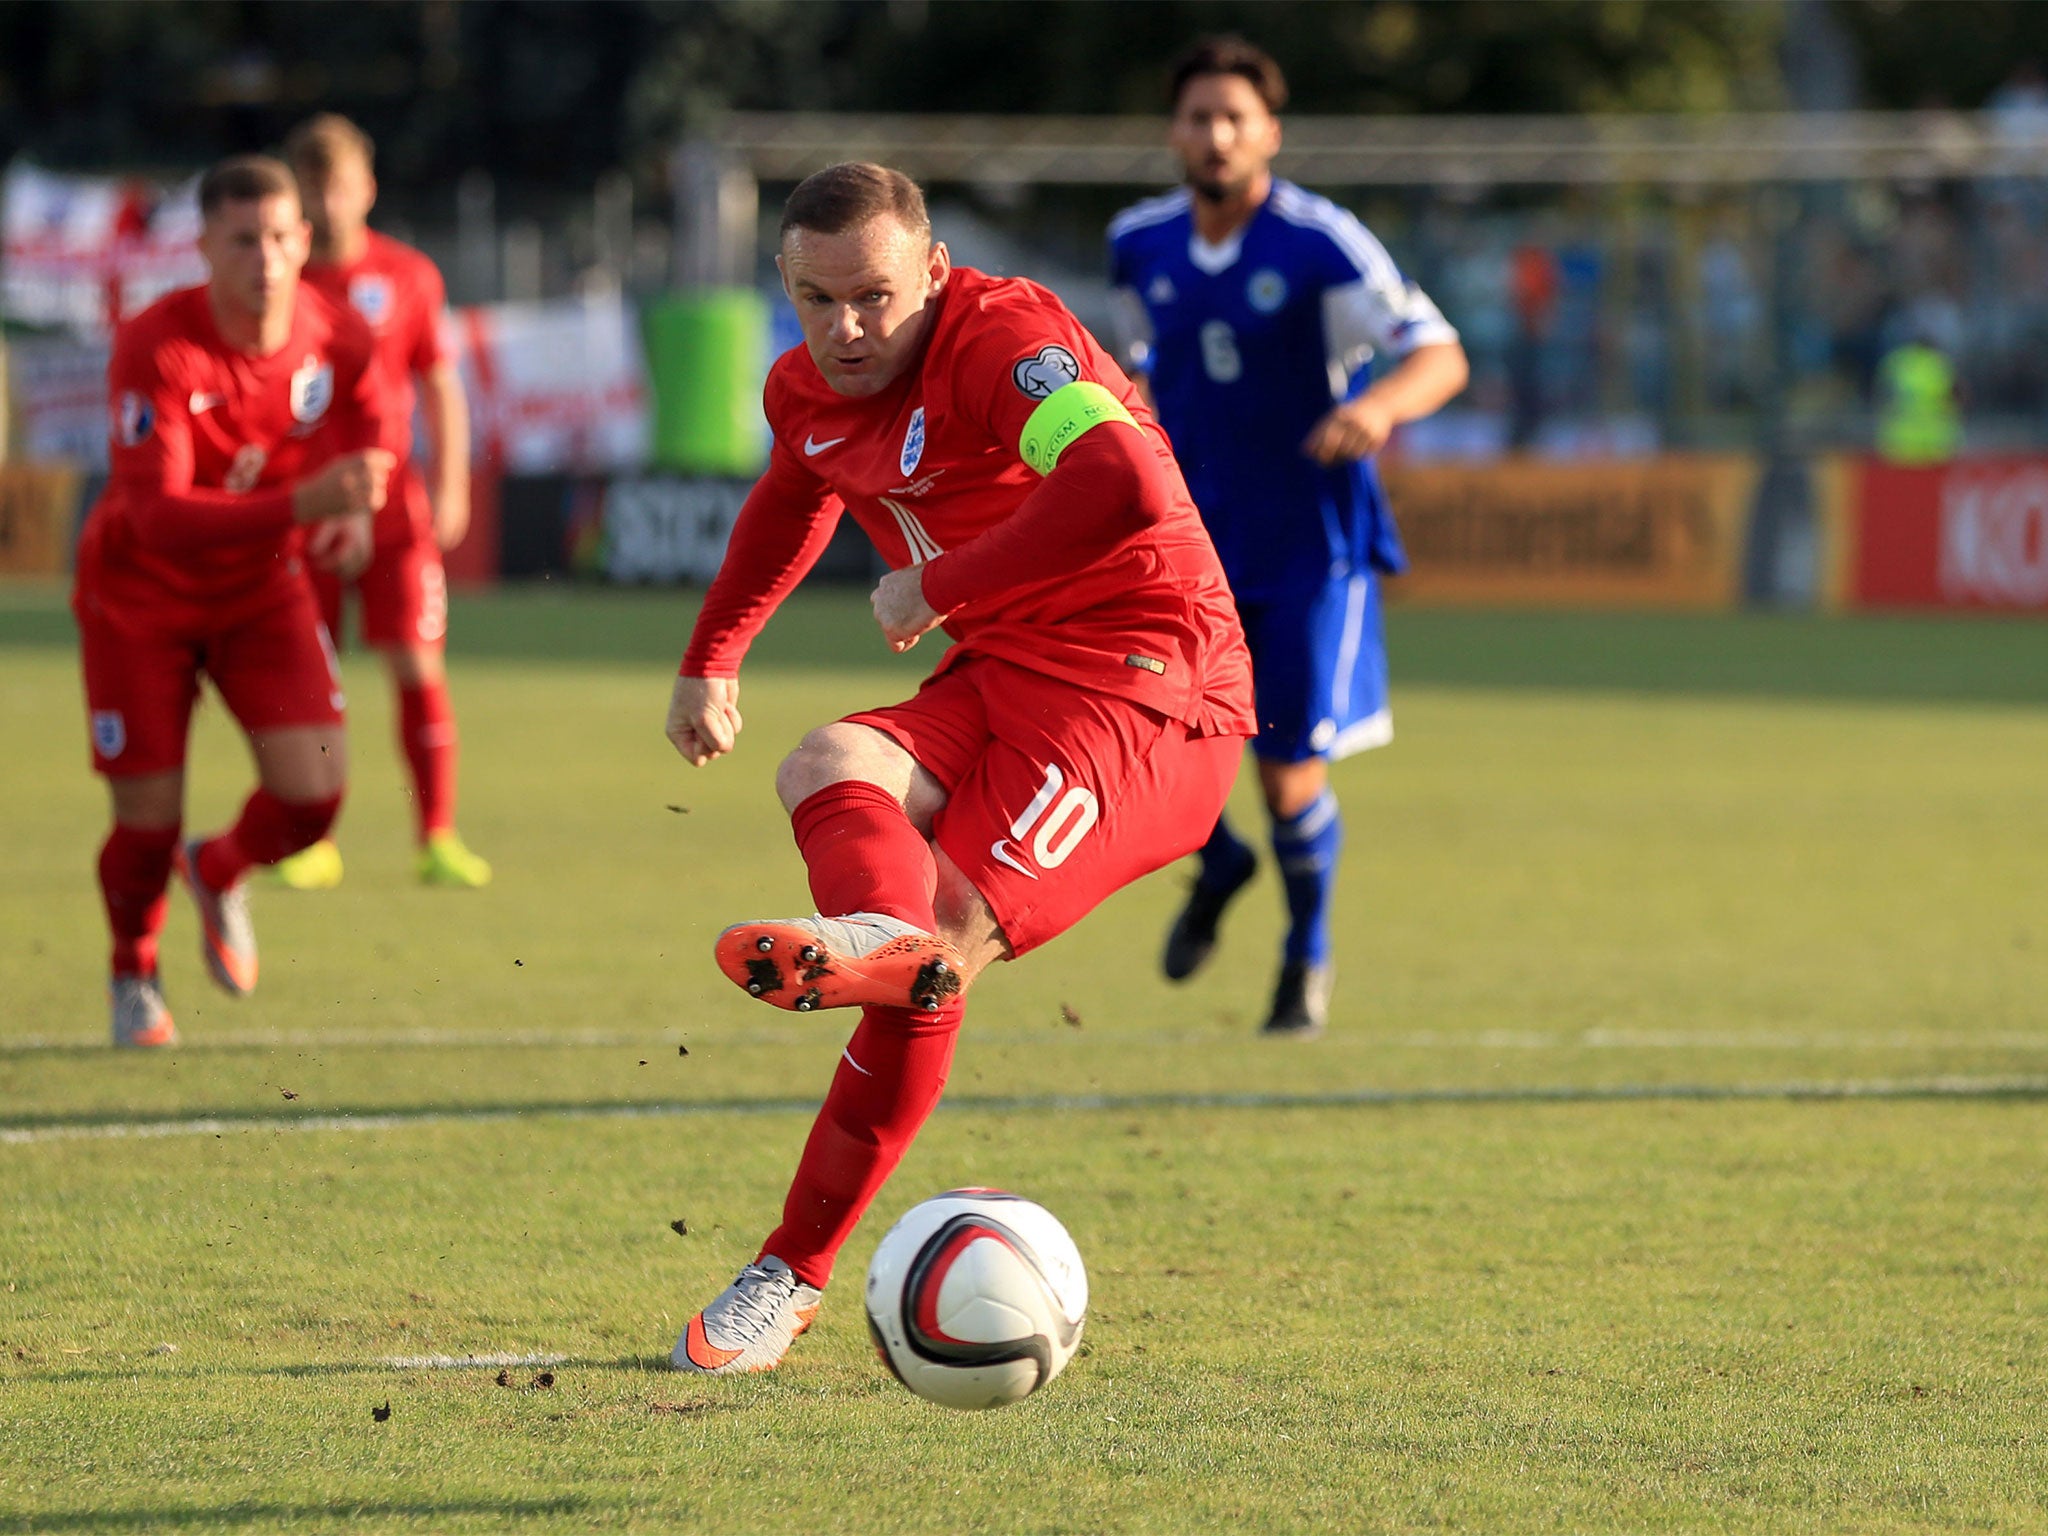 Wayne Rooney scores from the spot against San Marino to equal the England goal scoring record